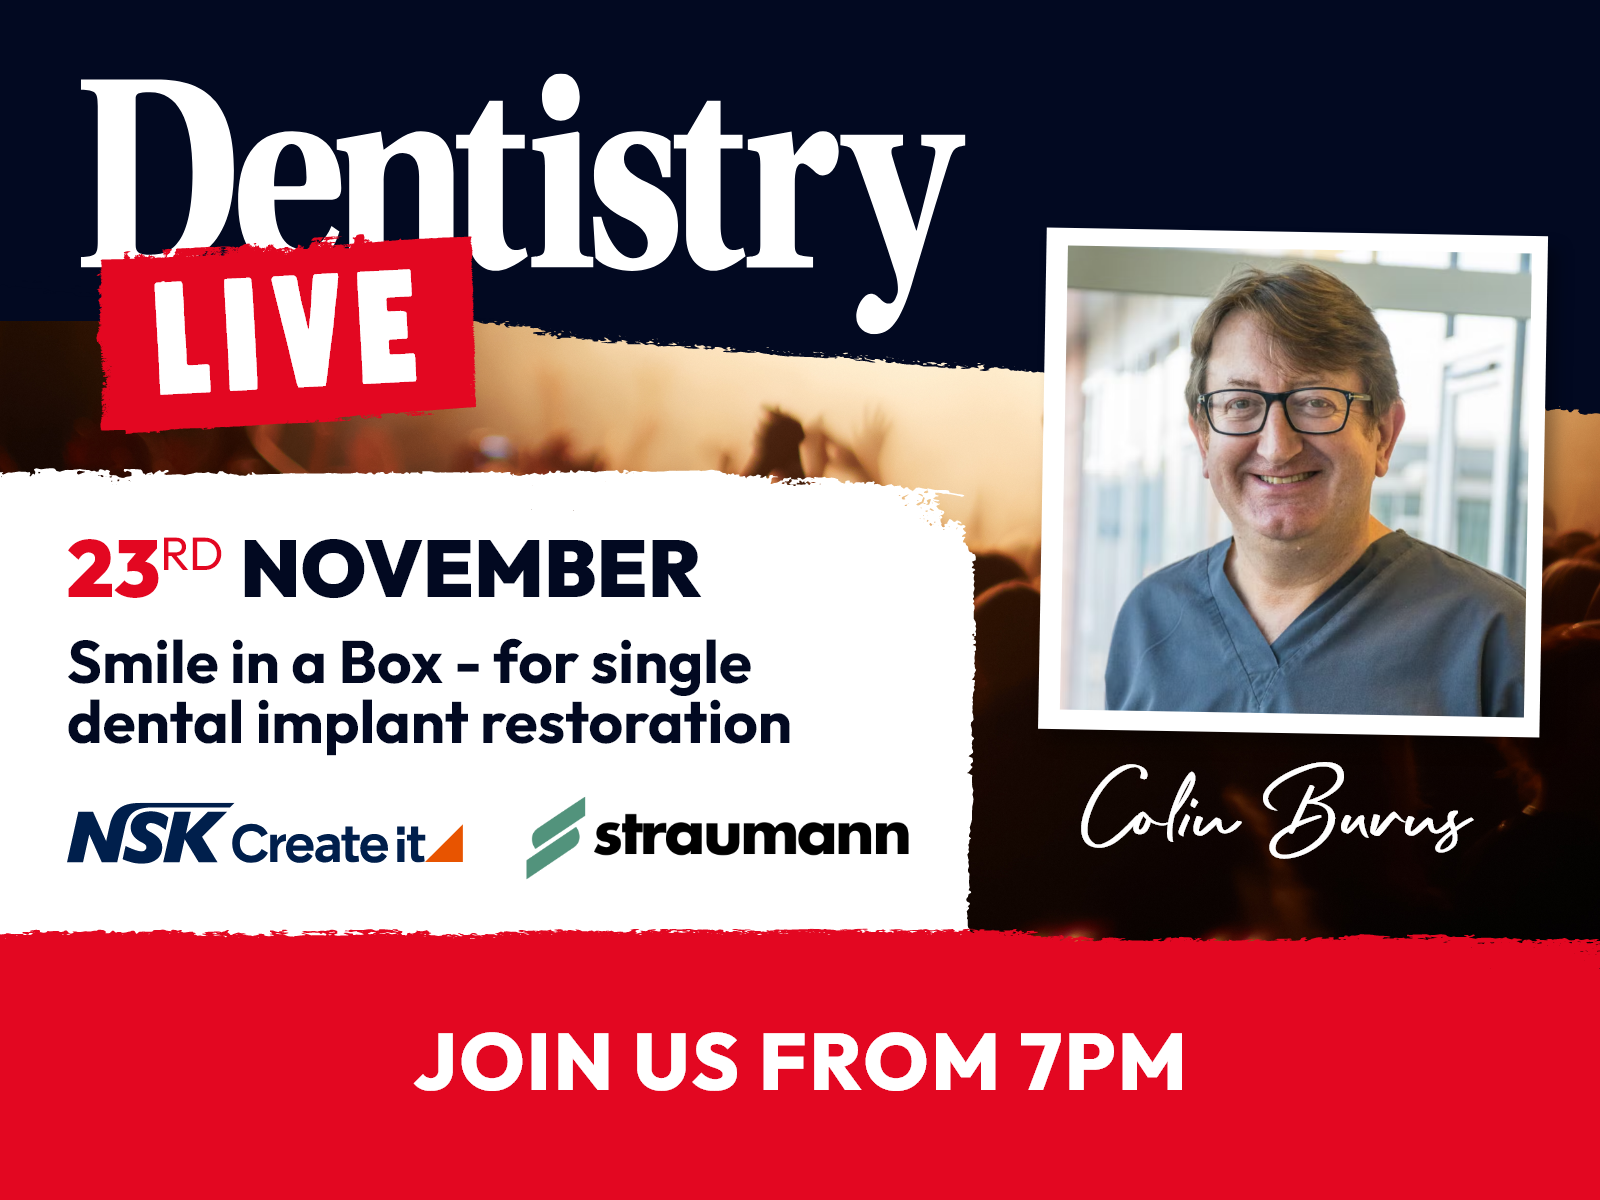 Join Colin Burns on Thursday 23 November at 7pm as he discusses single dental implant restoration for a challenging case of dental trauma.